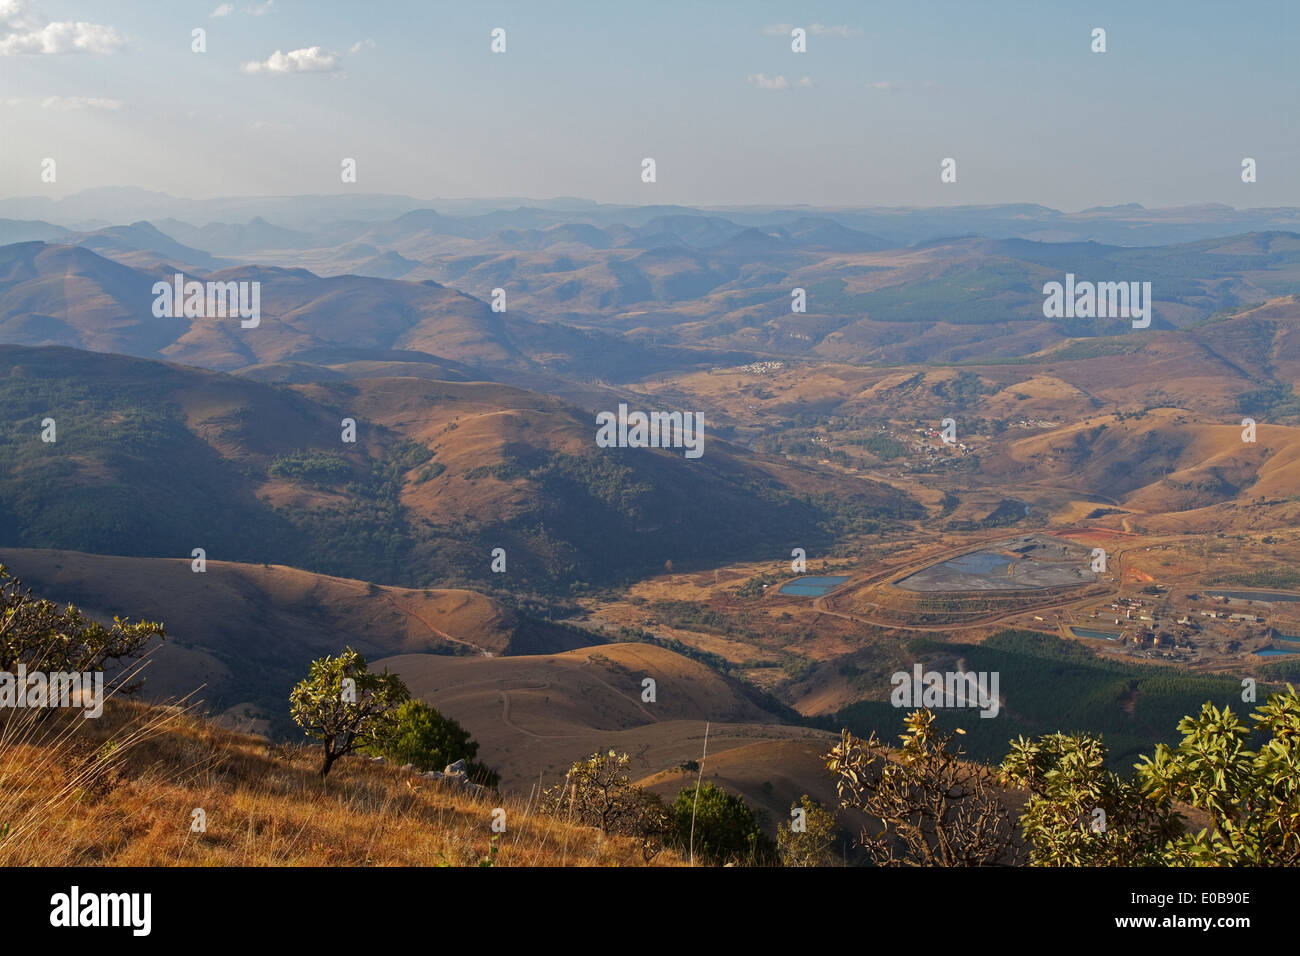 Mountain scenery from Mount Sheba to Pilgrim's Rest in the northern Drakensberg Mpumalanga, Stock Photo